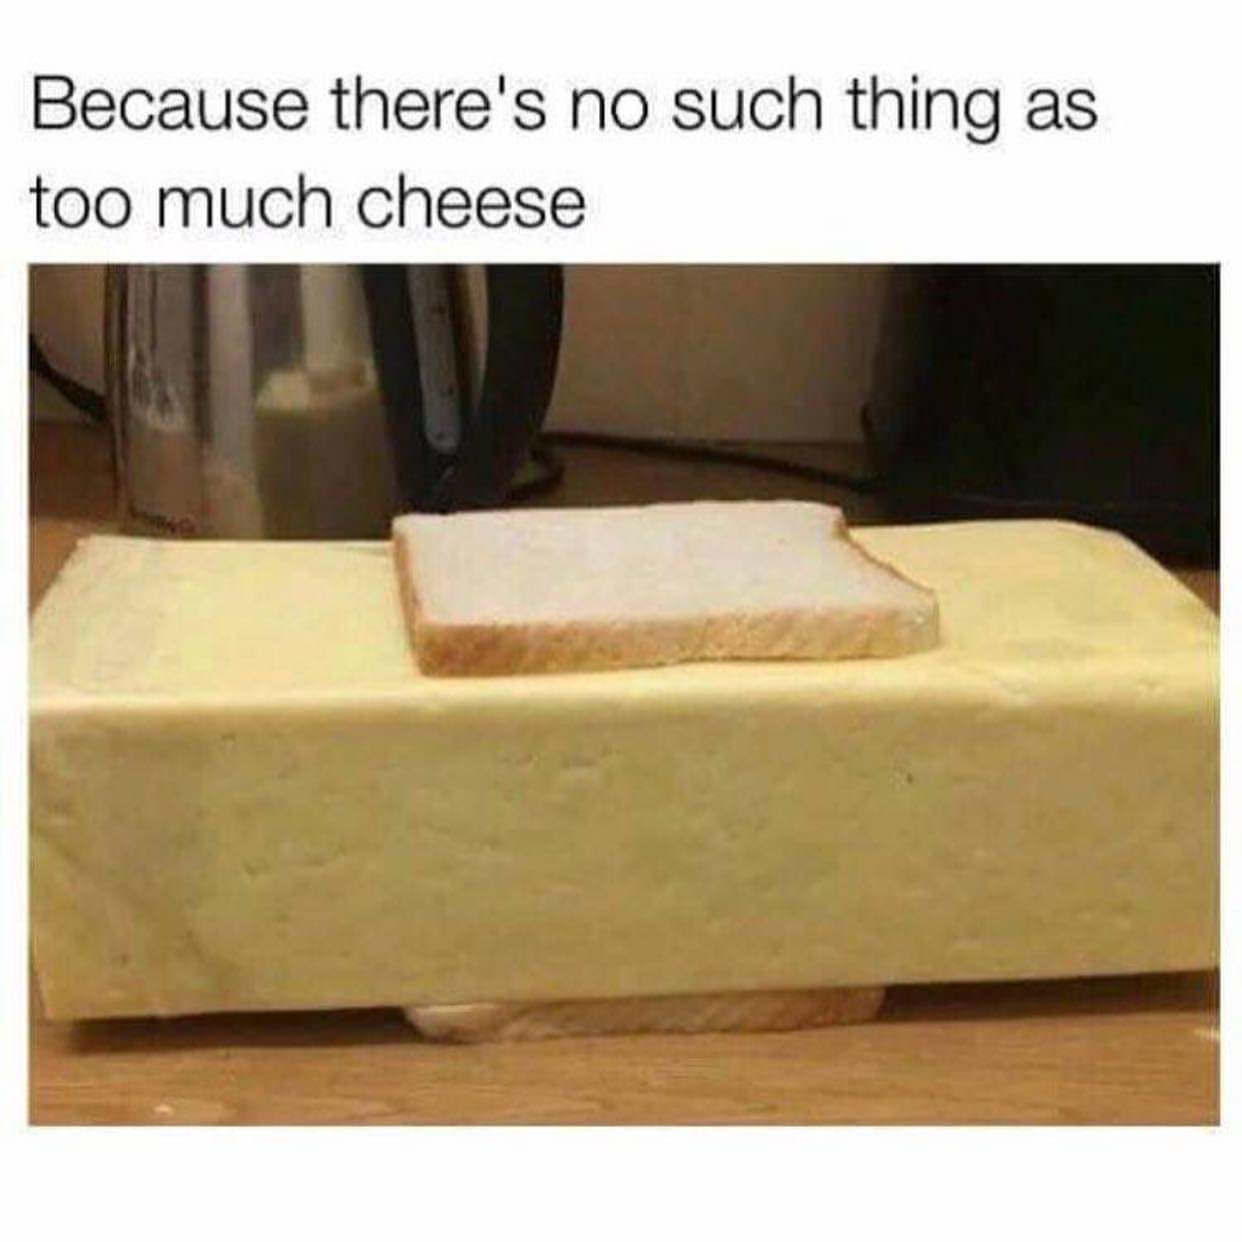 memes - there's no such thing as too much cheese - Because there's no such thing as too much cheese